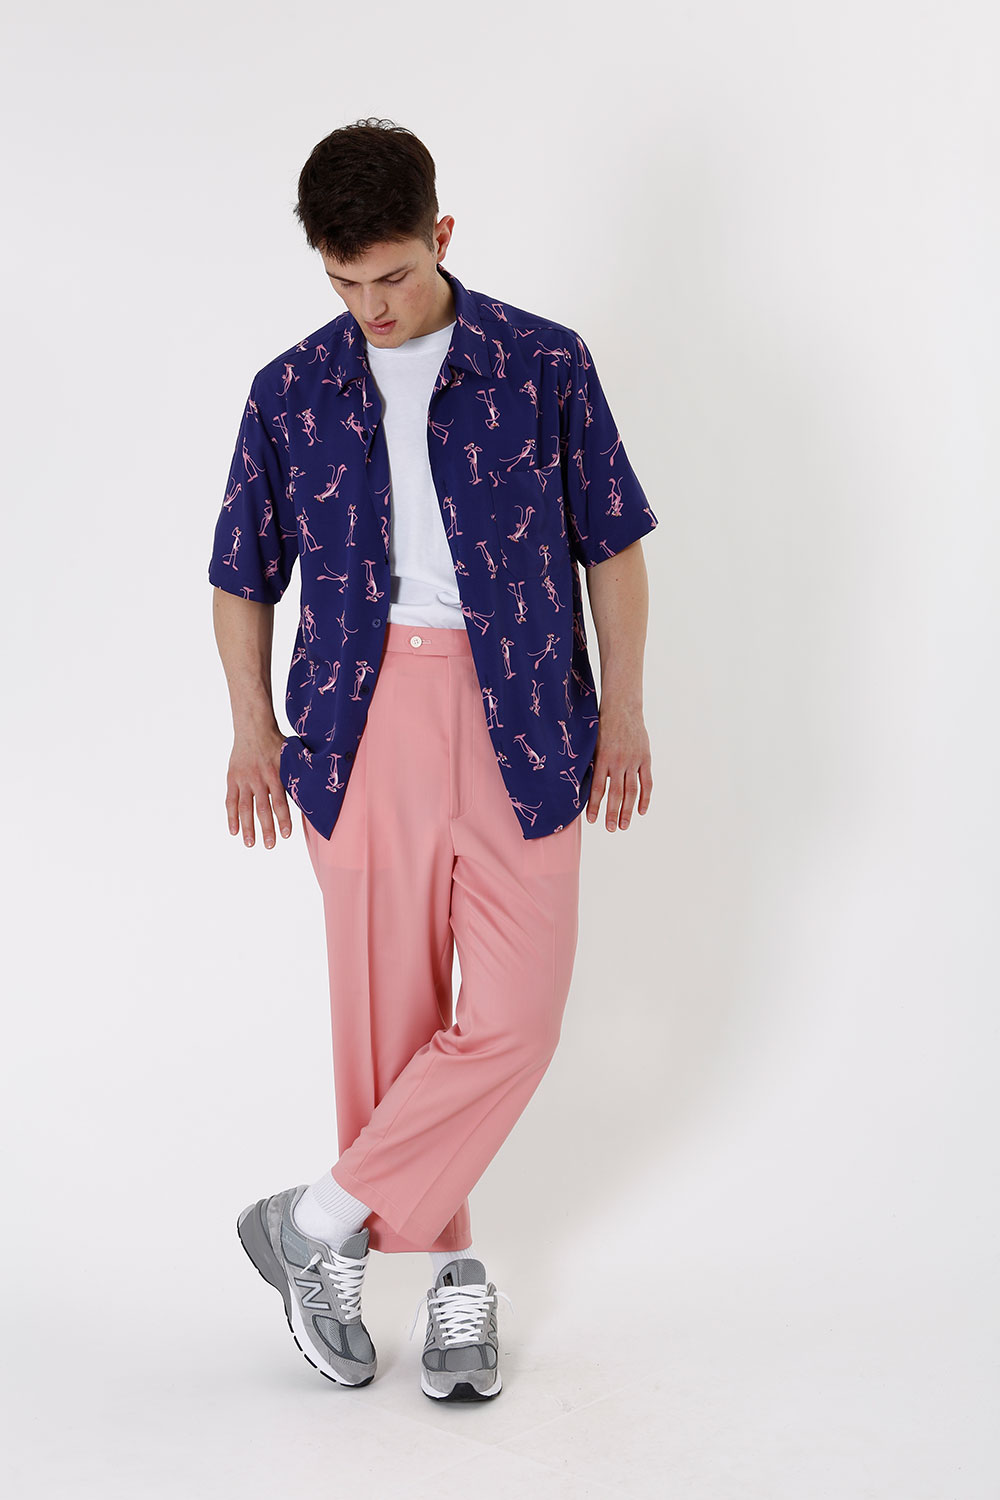 lc23 ss20 pink panther